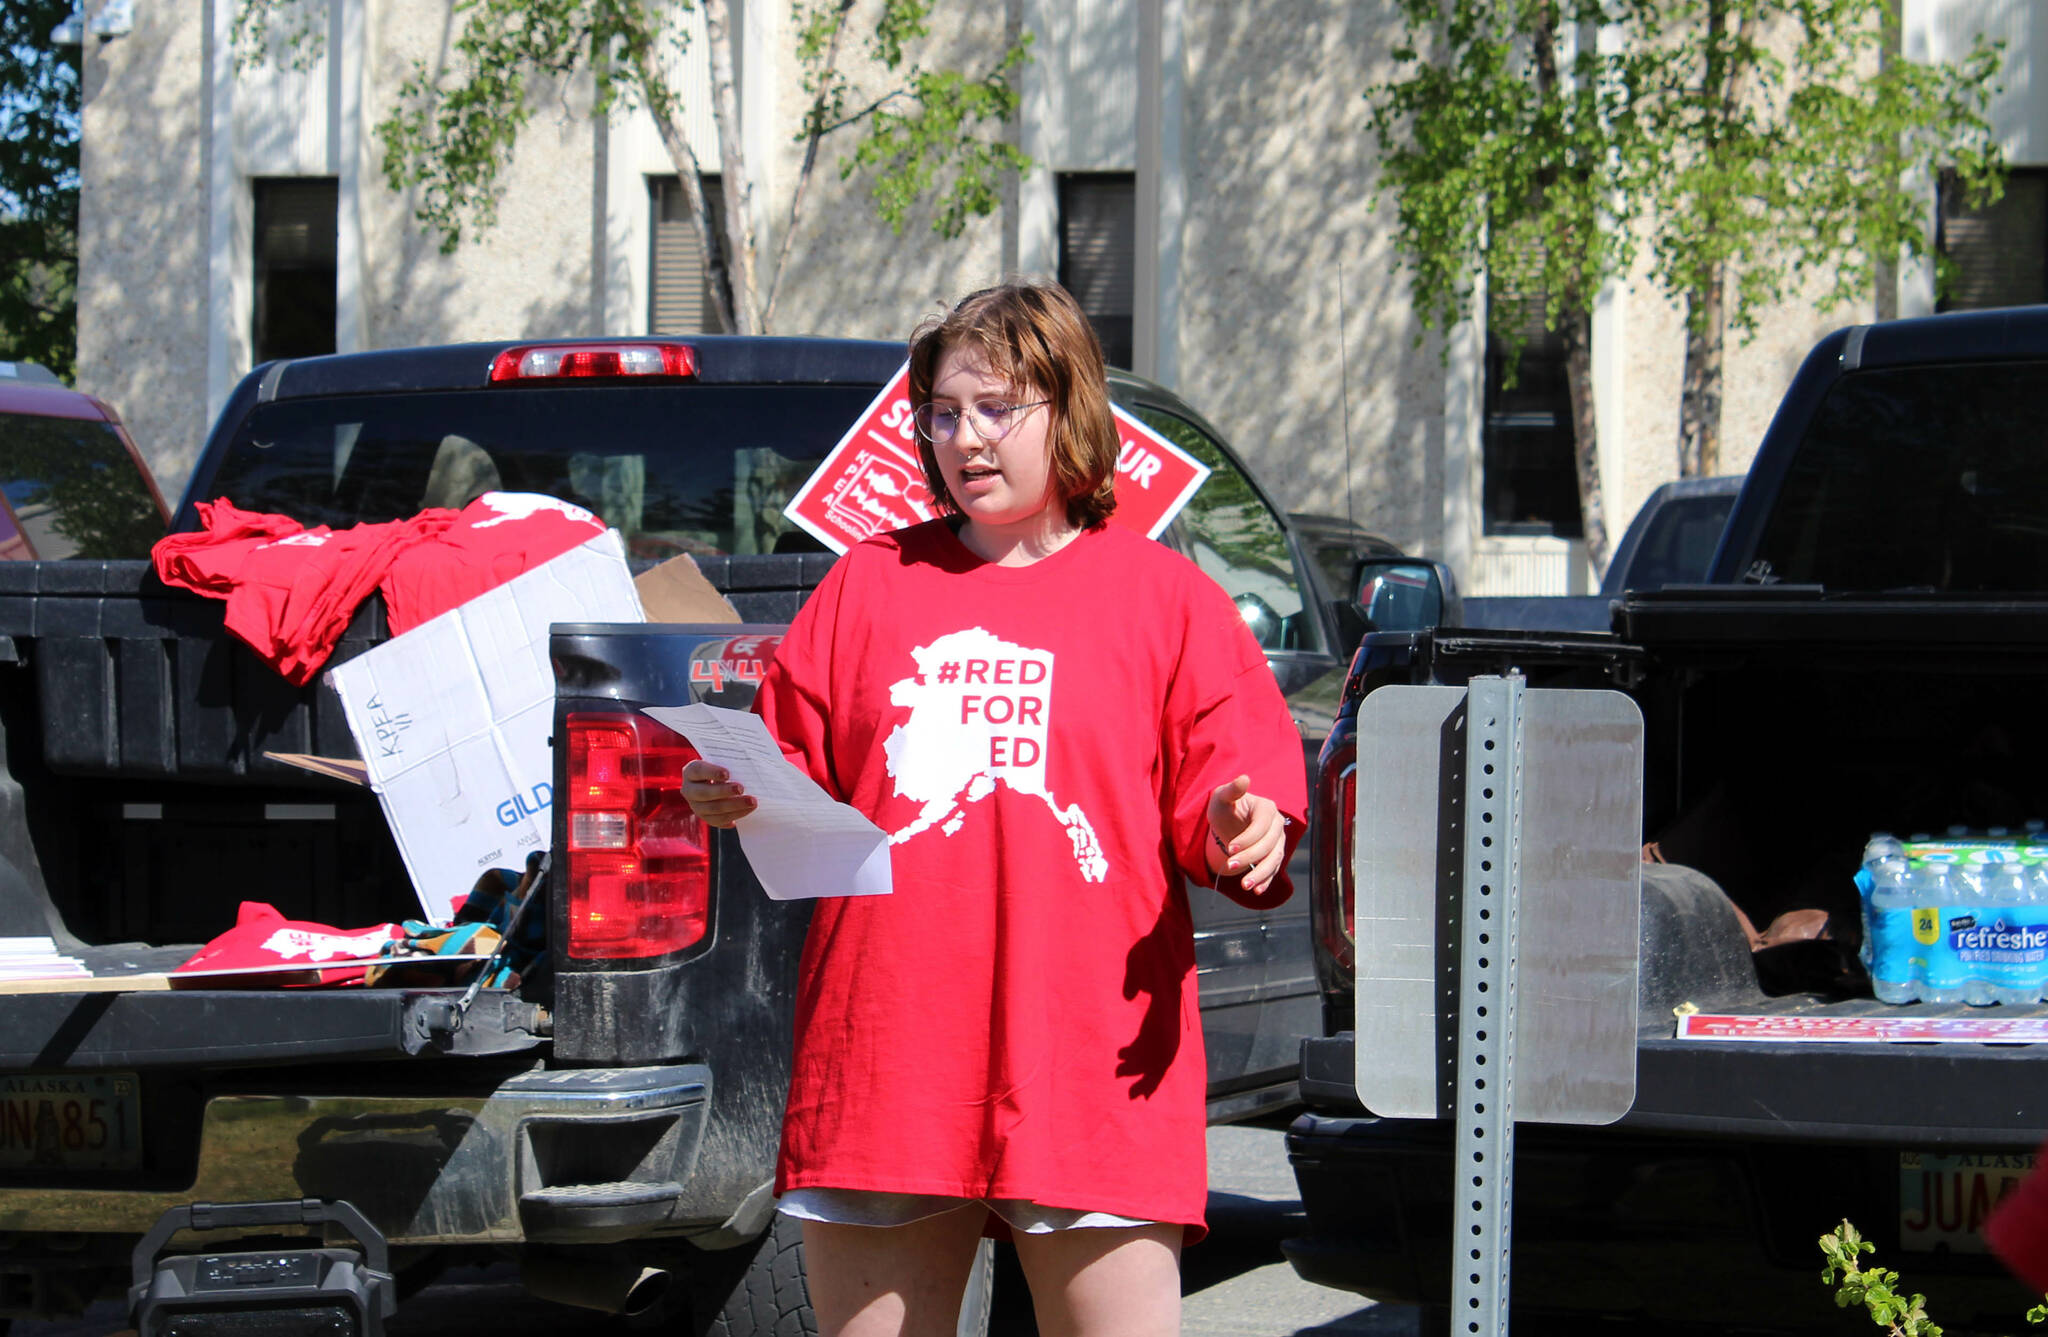 Former Kenai Peninsula Borough School District student Olivia Davis speaks in support of district teachers and staff during a rally outside of the George A. Navarre Admin Building on Thursday, May 26, 2022 in Soldotna, Alaska. (Ashlyn O’Hara/Peninsula Clarion)